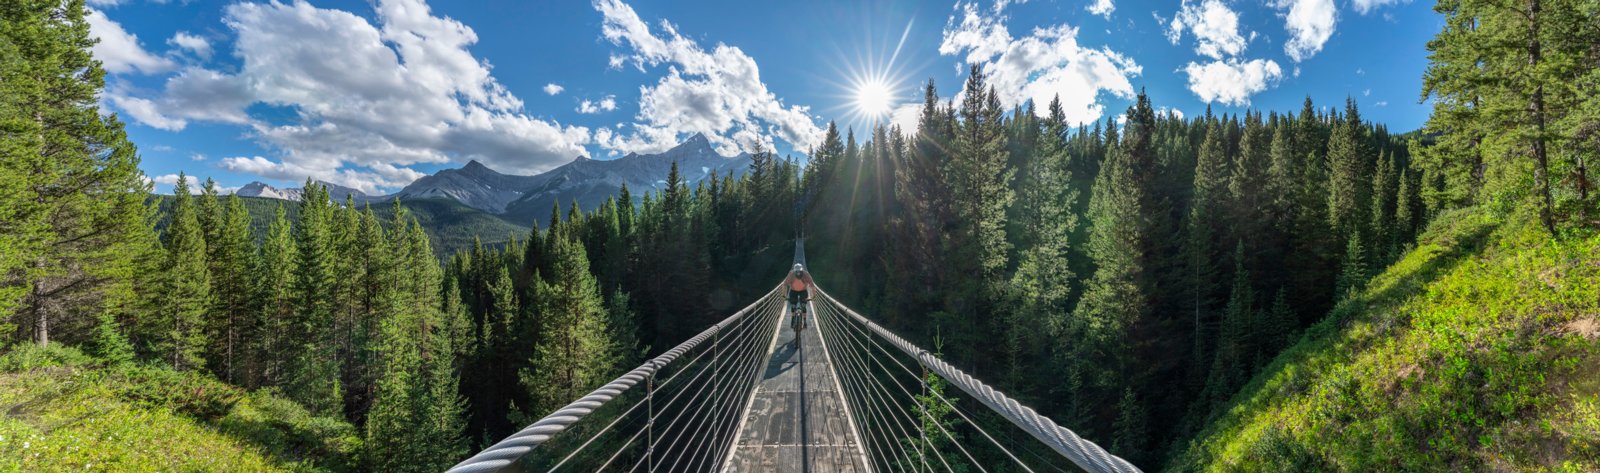 Person on a bike peddling in the middle of the Blackshale Suspension Bridge in Kananaskis Country.